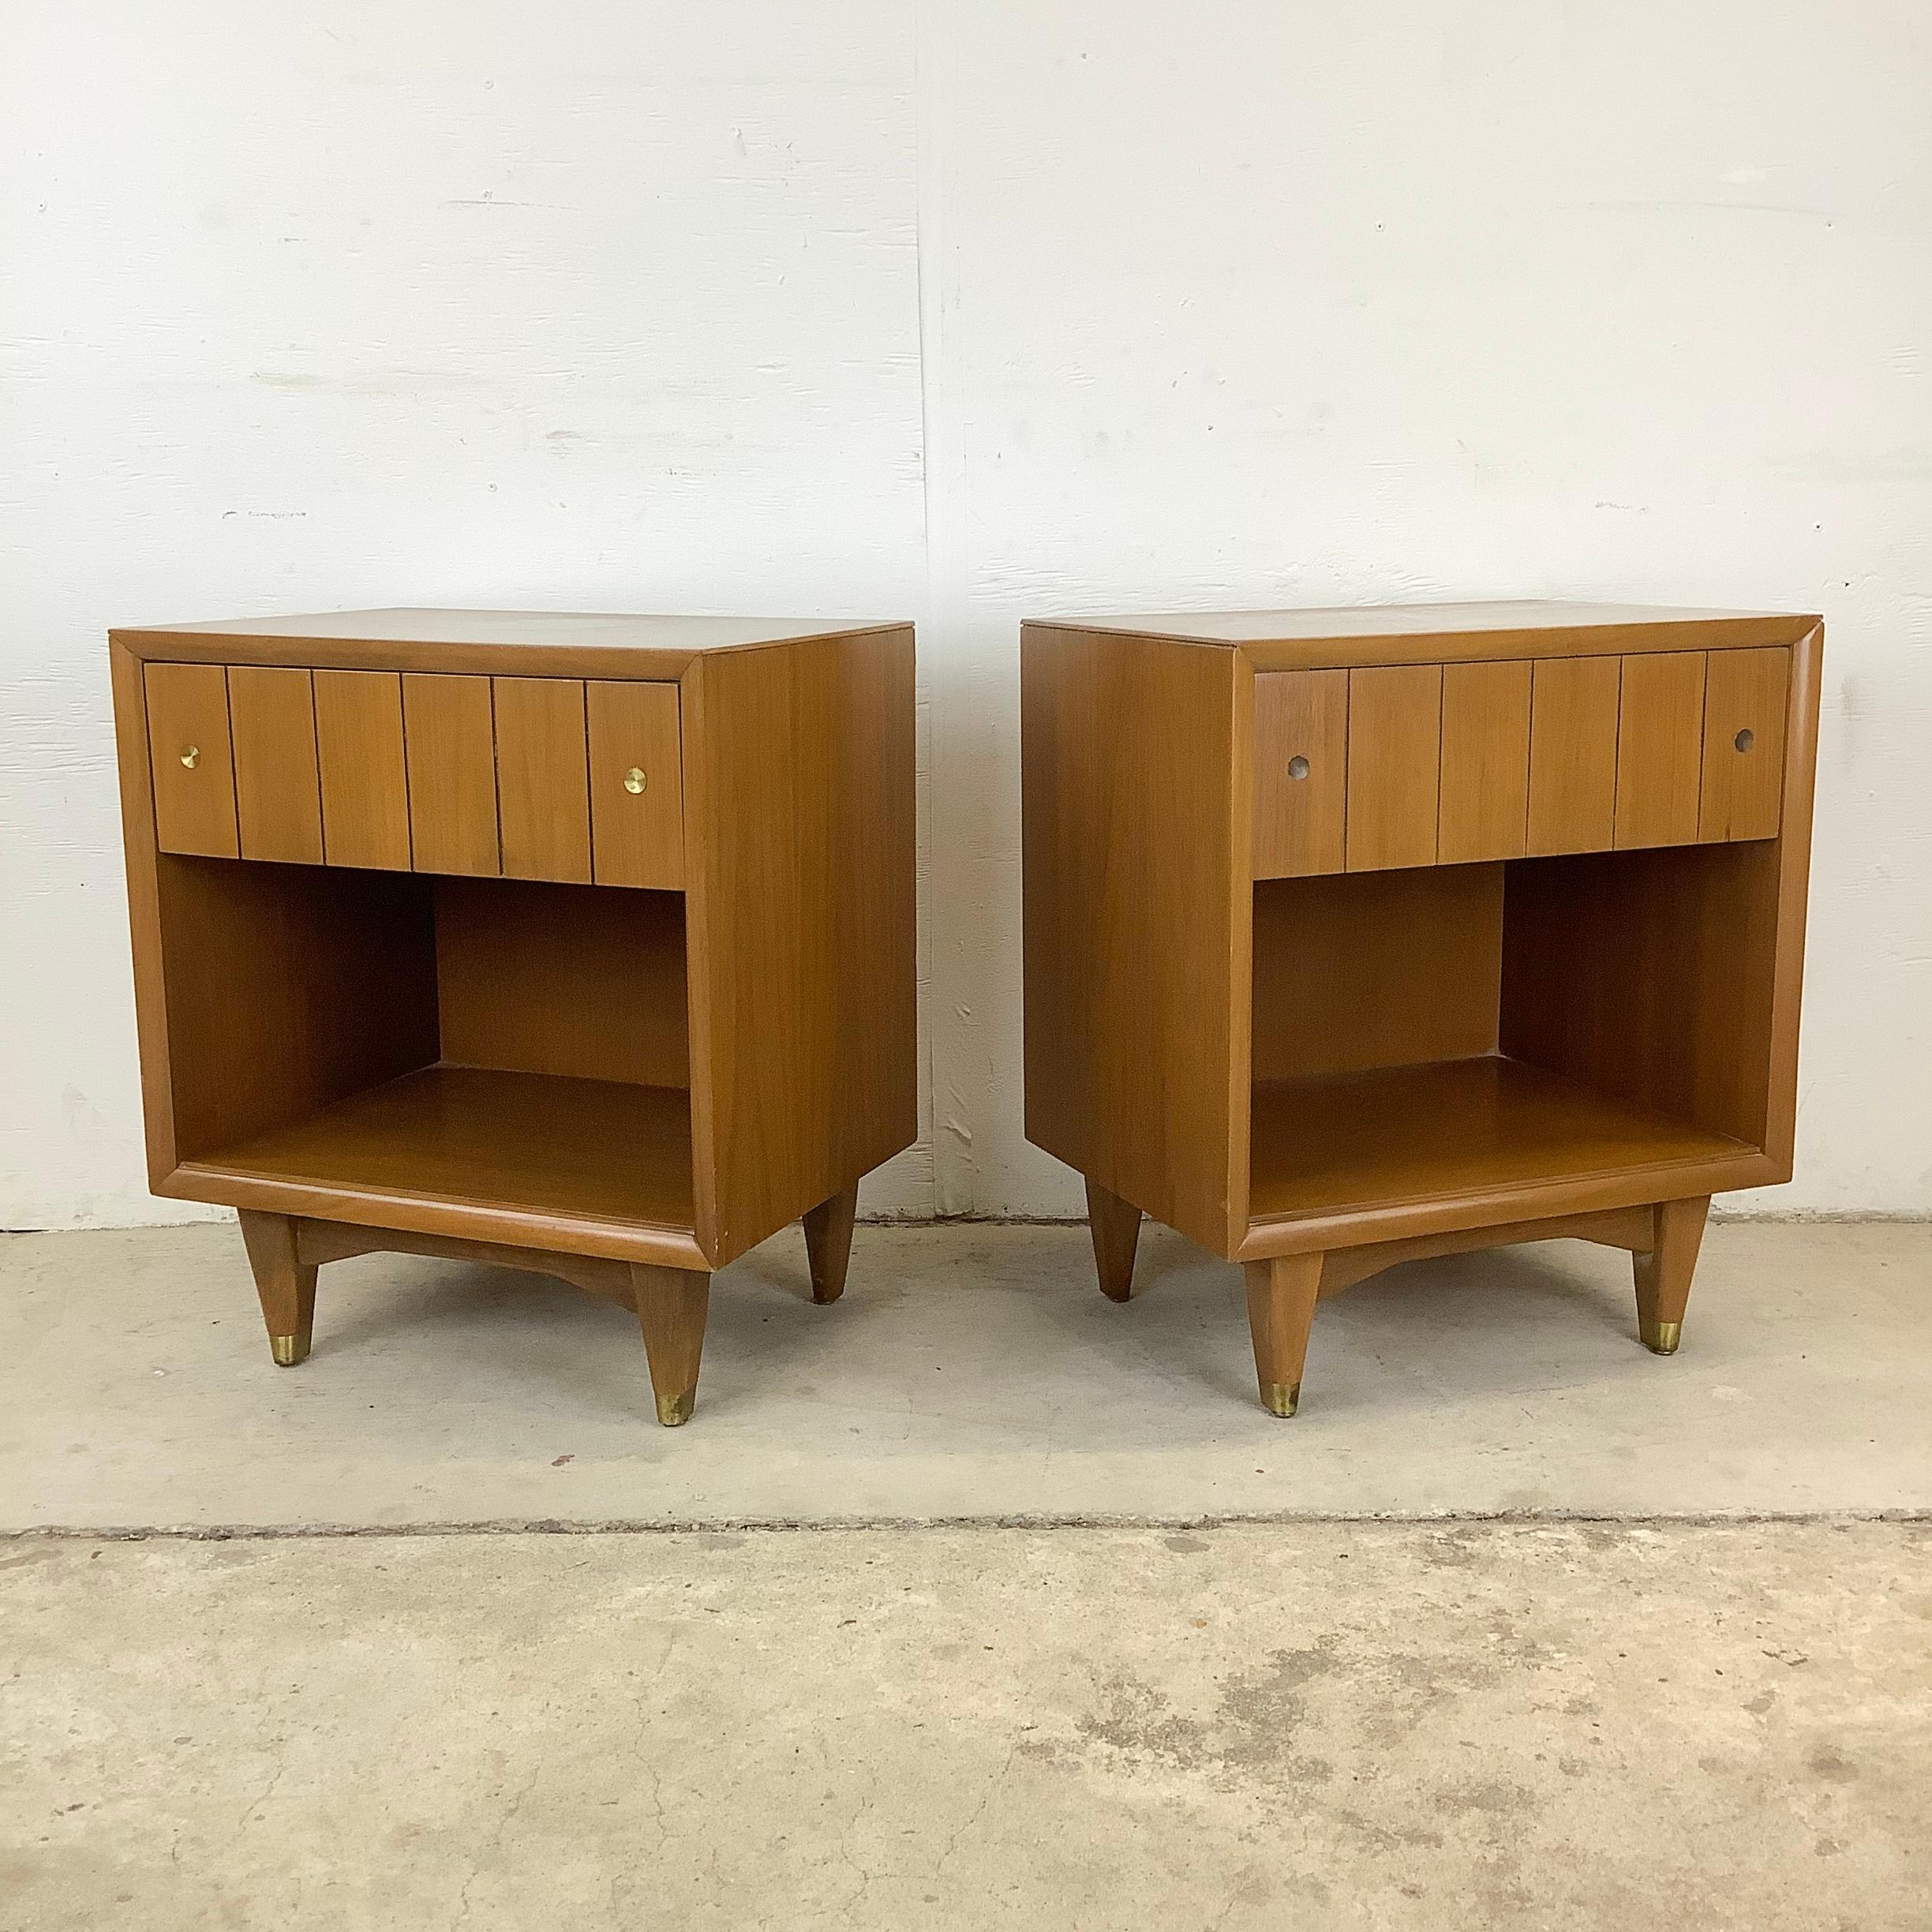 Step into the realm of mid-century style with this pair of vintage nightstands by Kroehler Furniture. Renowned for their sleek lines and impeccable craftsmanship, these nightstands are a testament to the enduring allure of mid-century modern design.